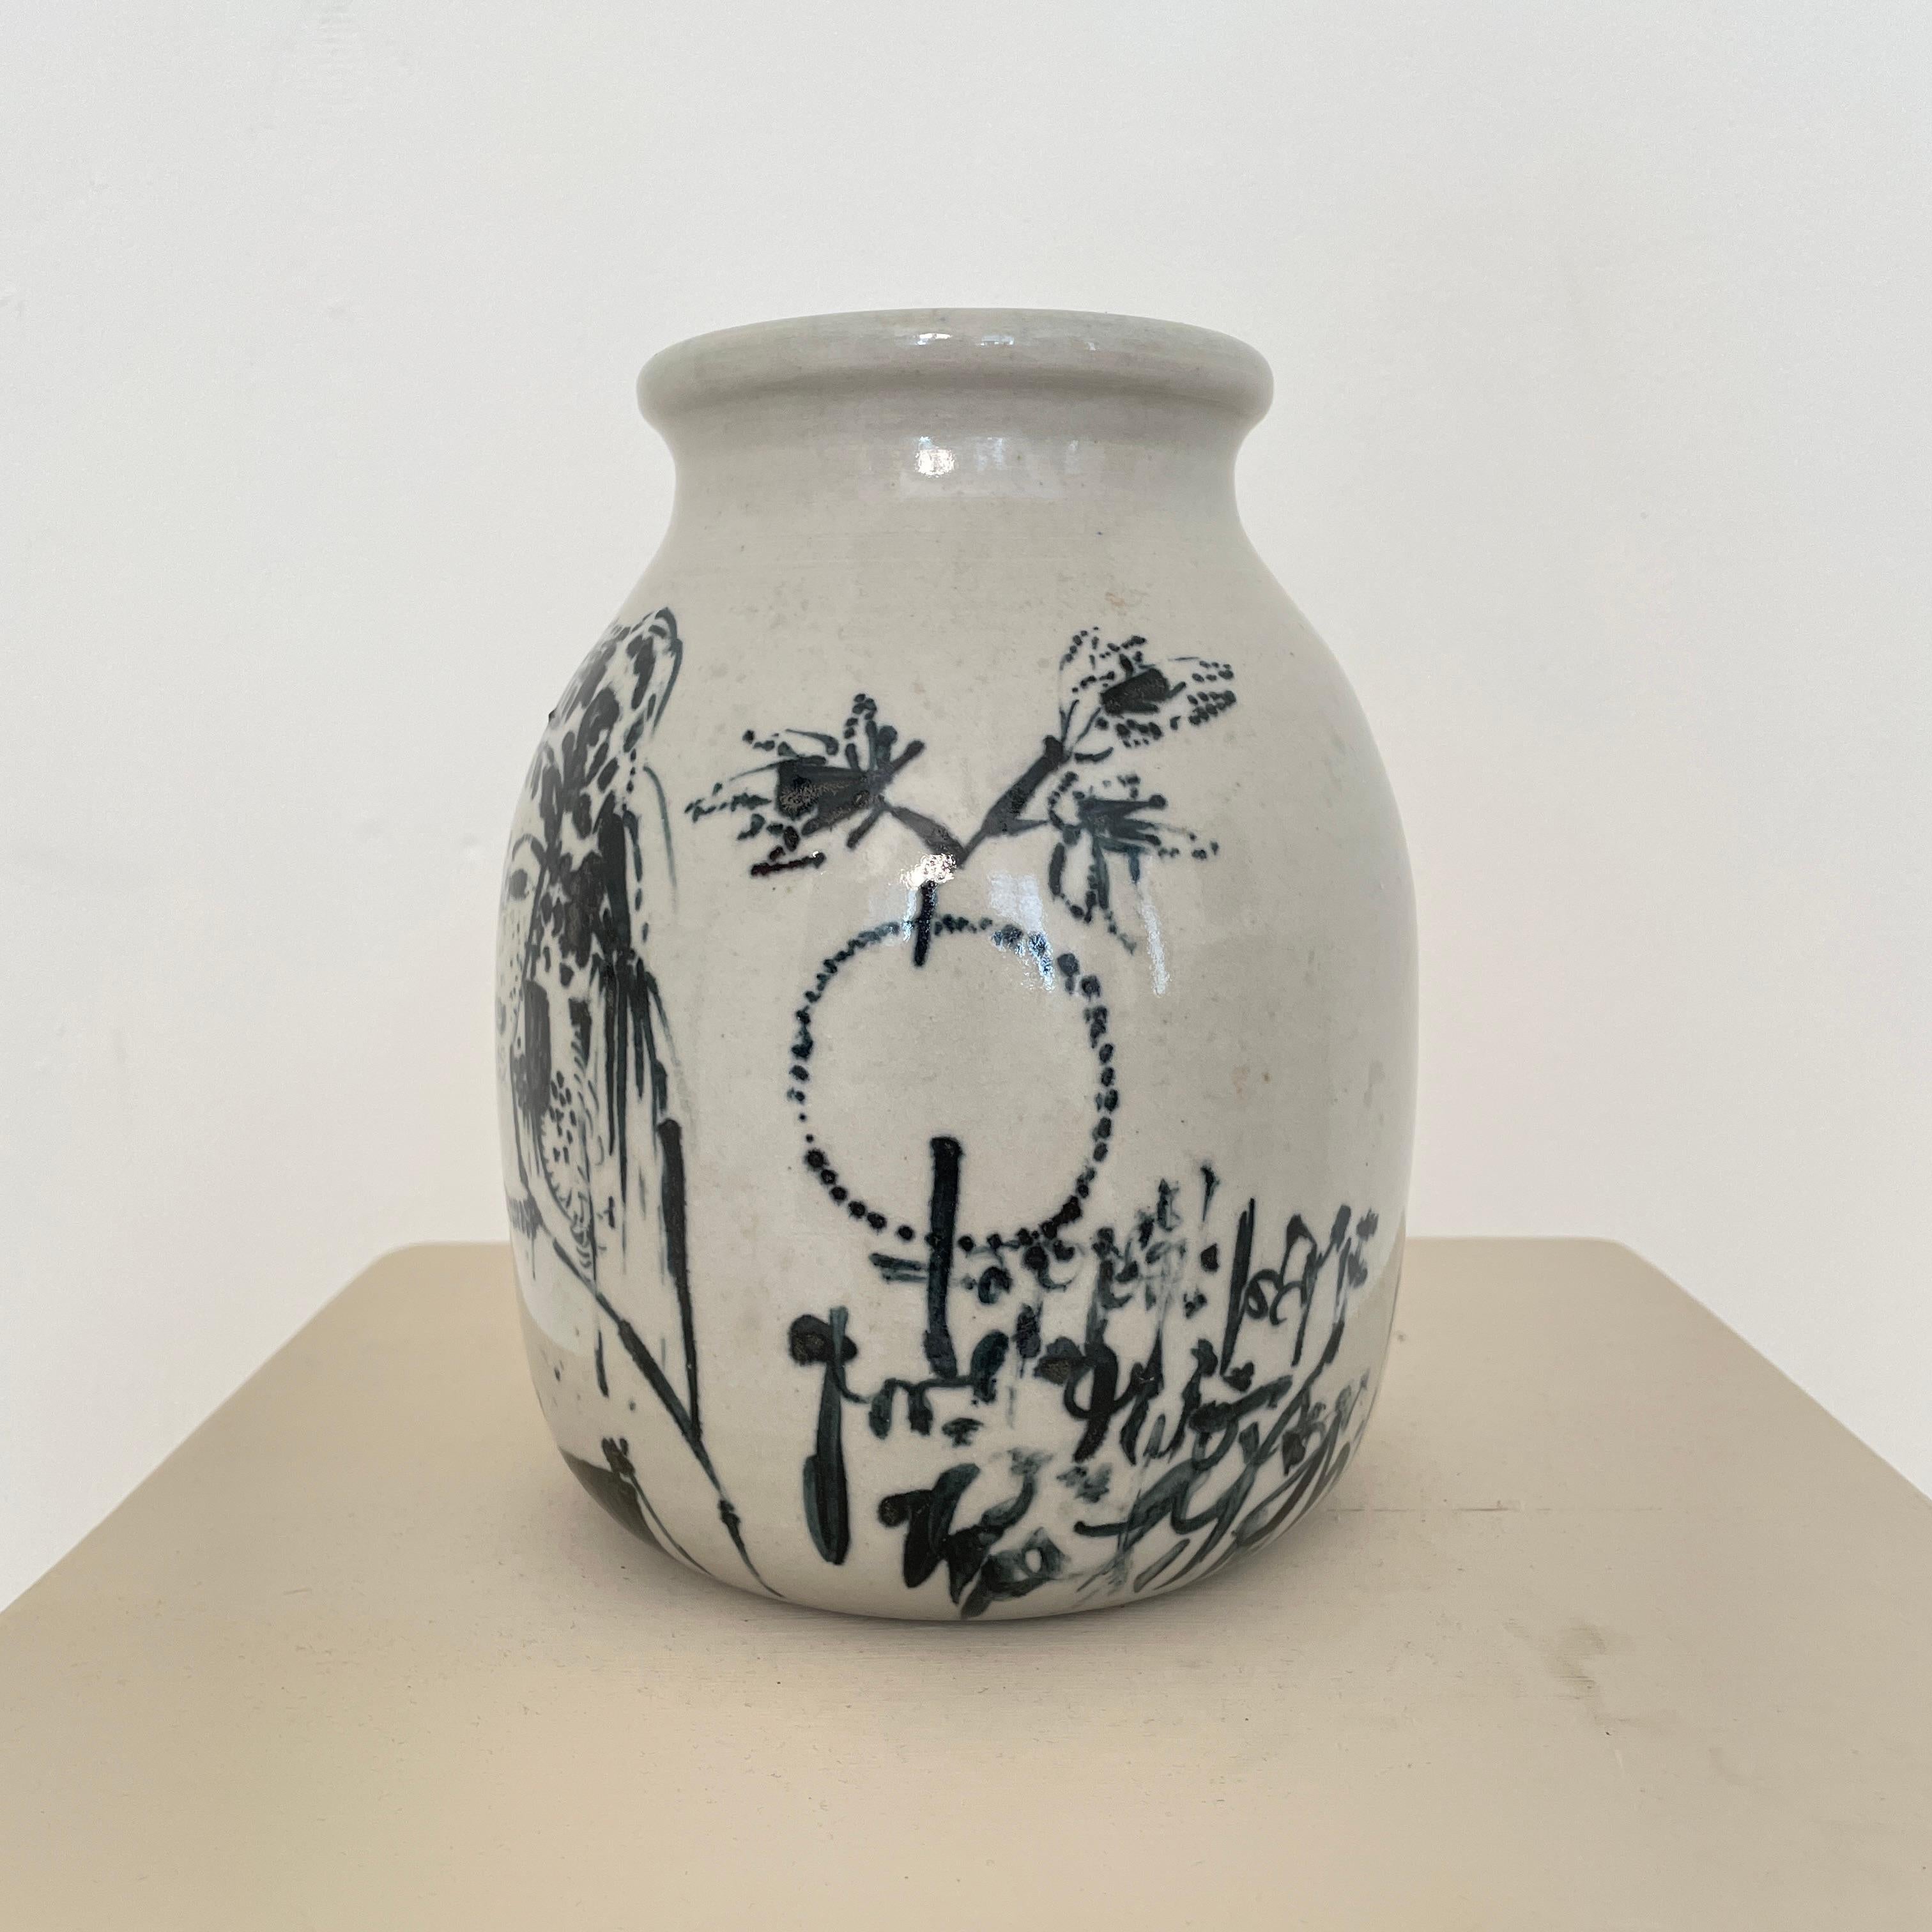 Late 20th Century Italian Stoneware Vase, Hand Painted and Glazed in Gray and Black, Around 1970